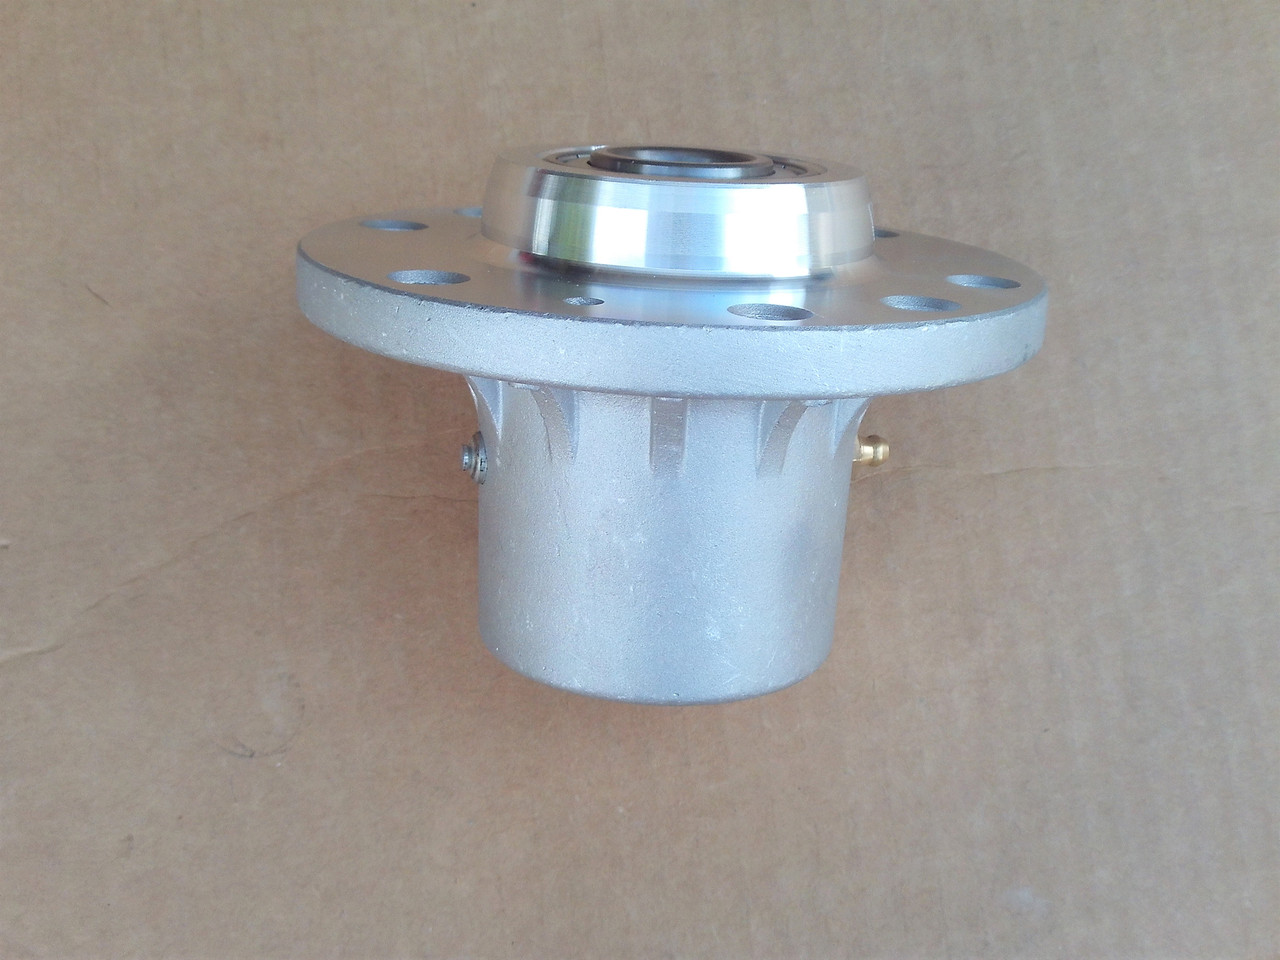 Deck Spindle Housing for Toro 1032533 1037975 1074065 1323532 1634619 103-2533 103-7975 107-4065 1-323532 1-634619